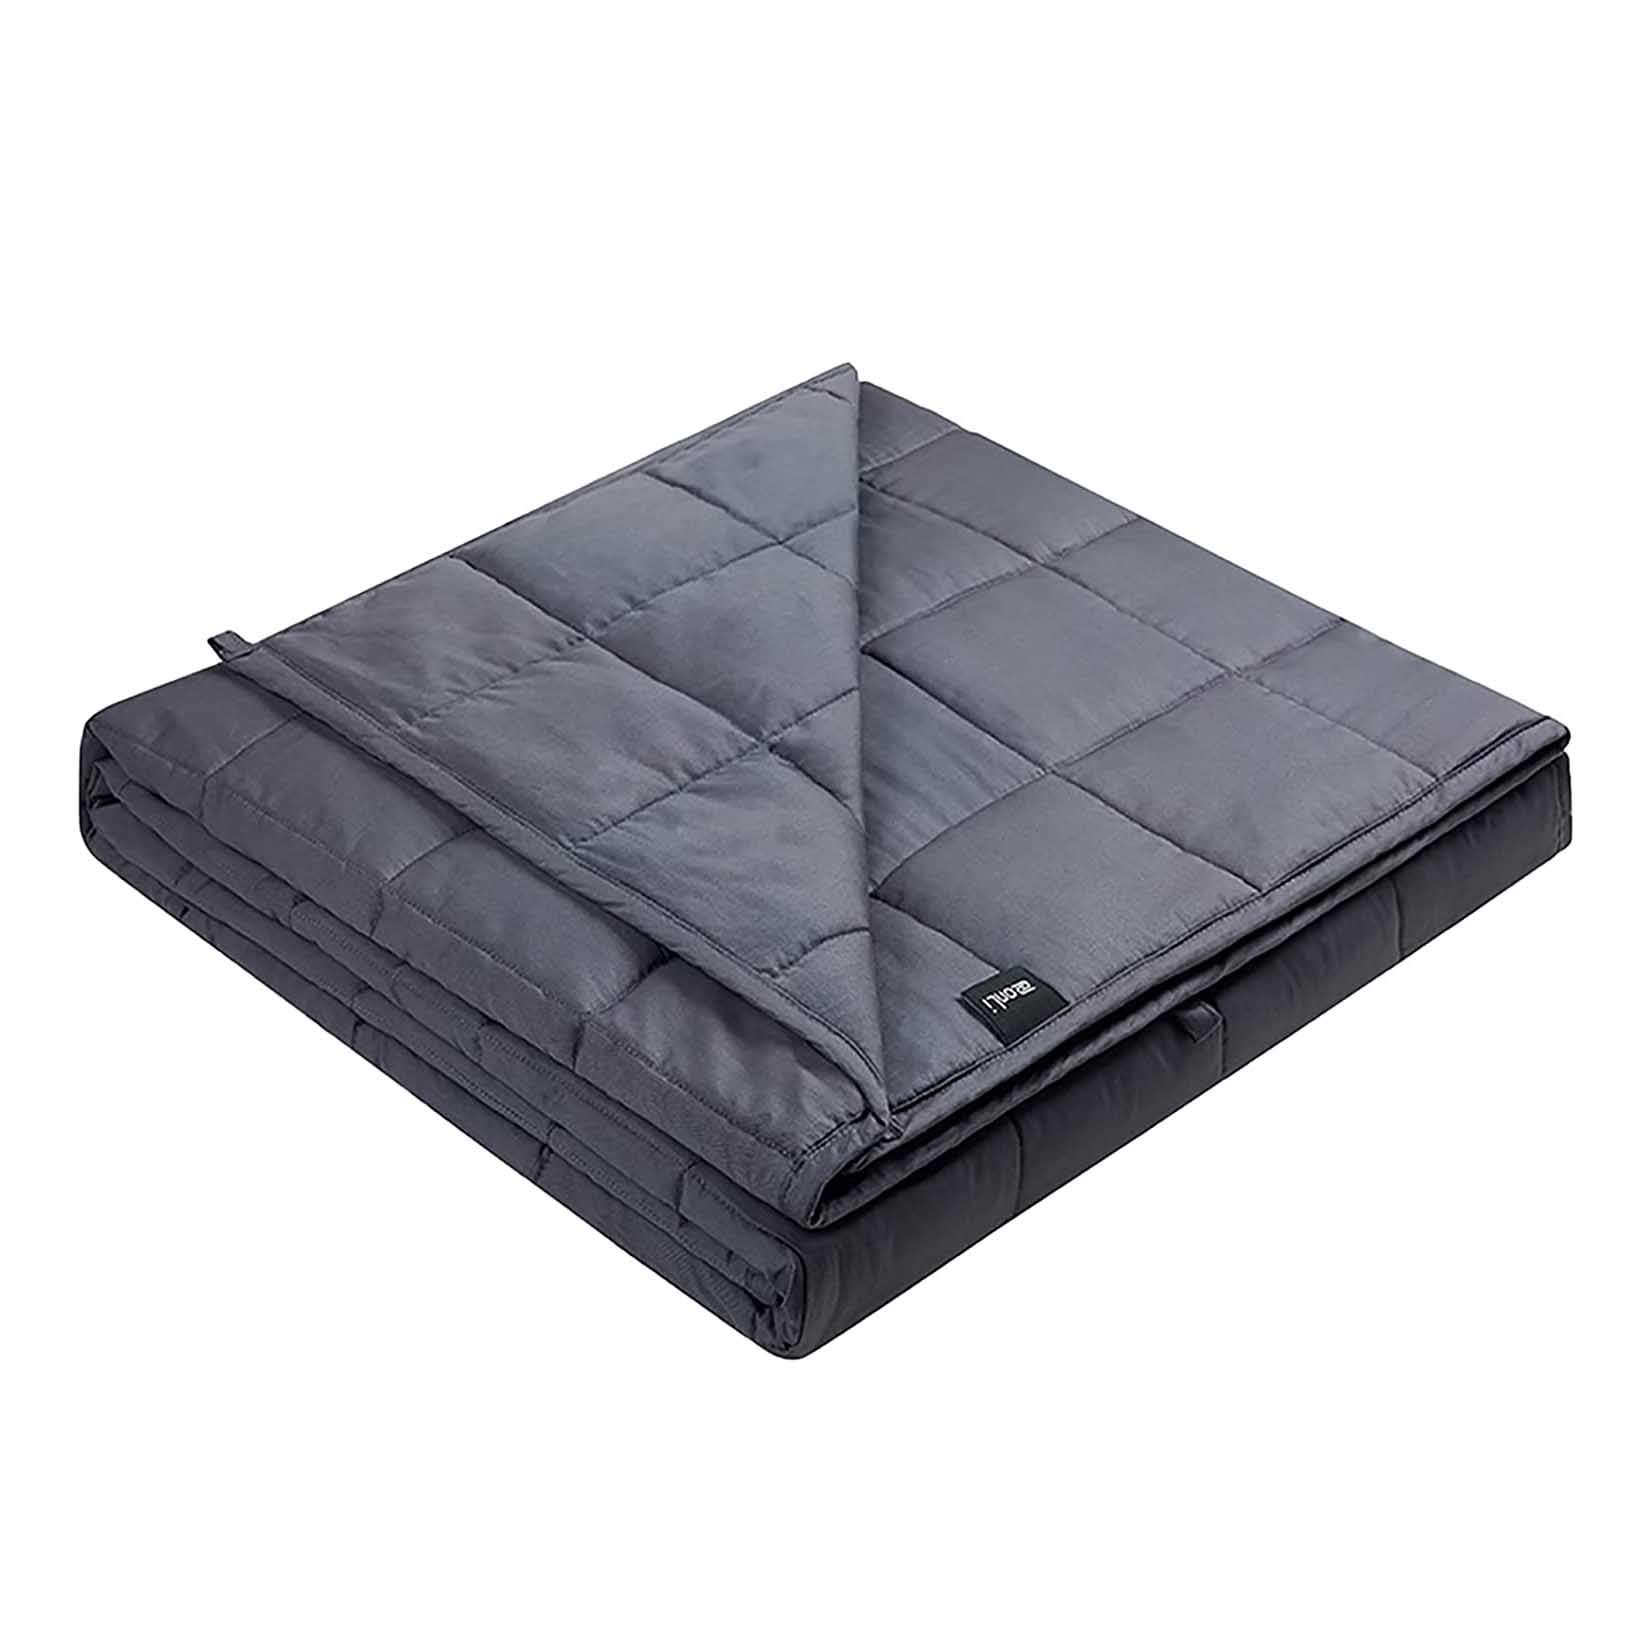 ODM Discount Chunky Weighted Blanket Factory- Weighted Blanket (60”x80”, 20lbs, Dark Grey), Cooling Weighted Blanket for Adults, High Breathability Heavy Blanket, Soft Material with Pr...